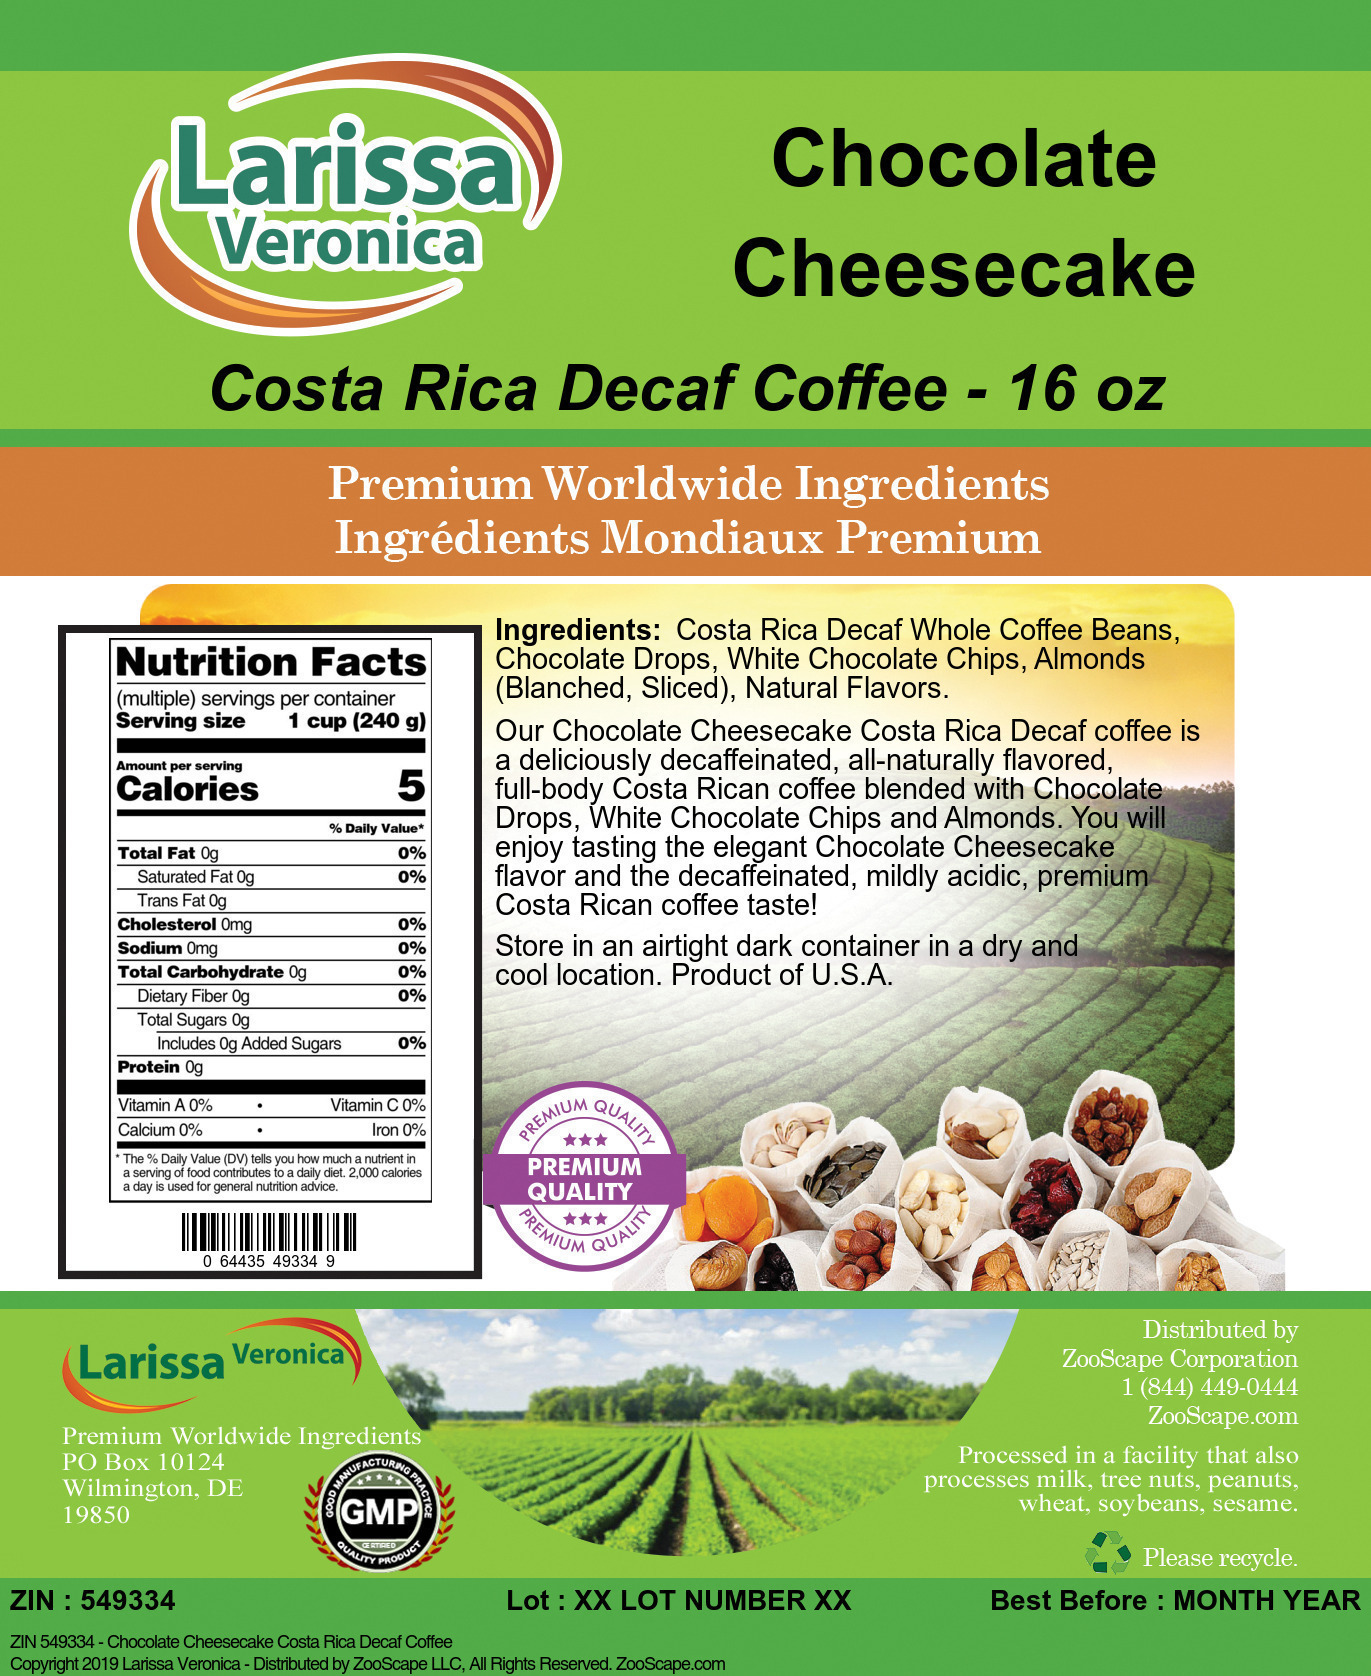 Chocolate Cheesecake Costa Rica Decaf Coffee - Label